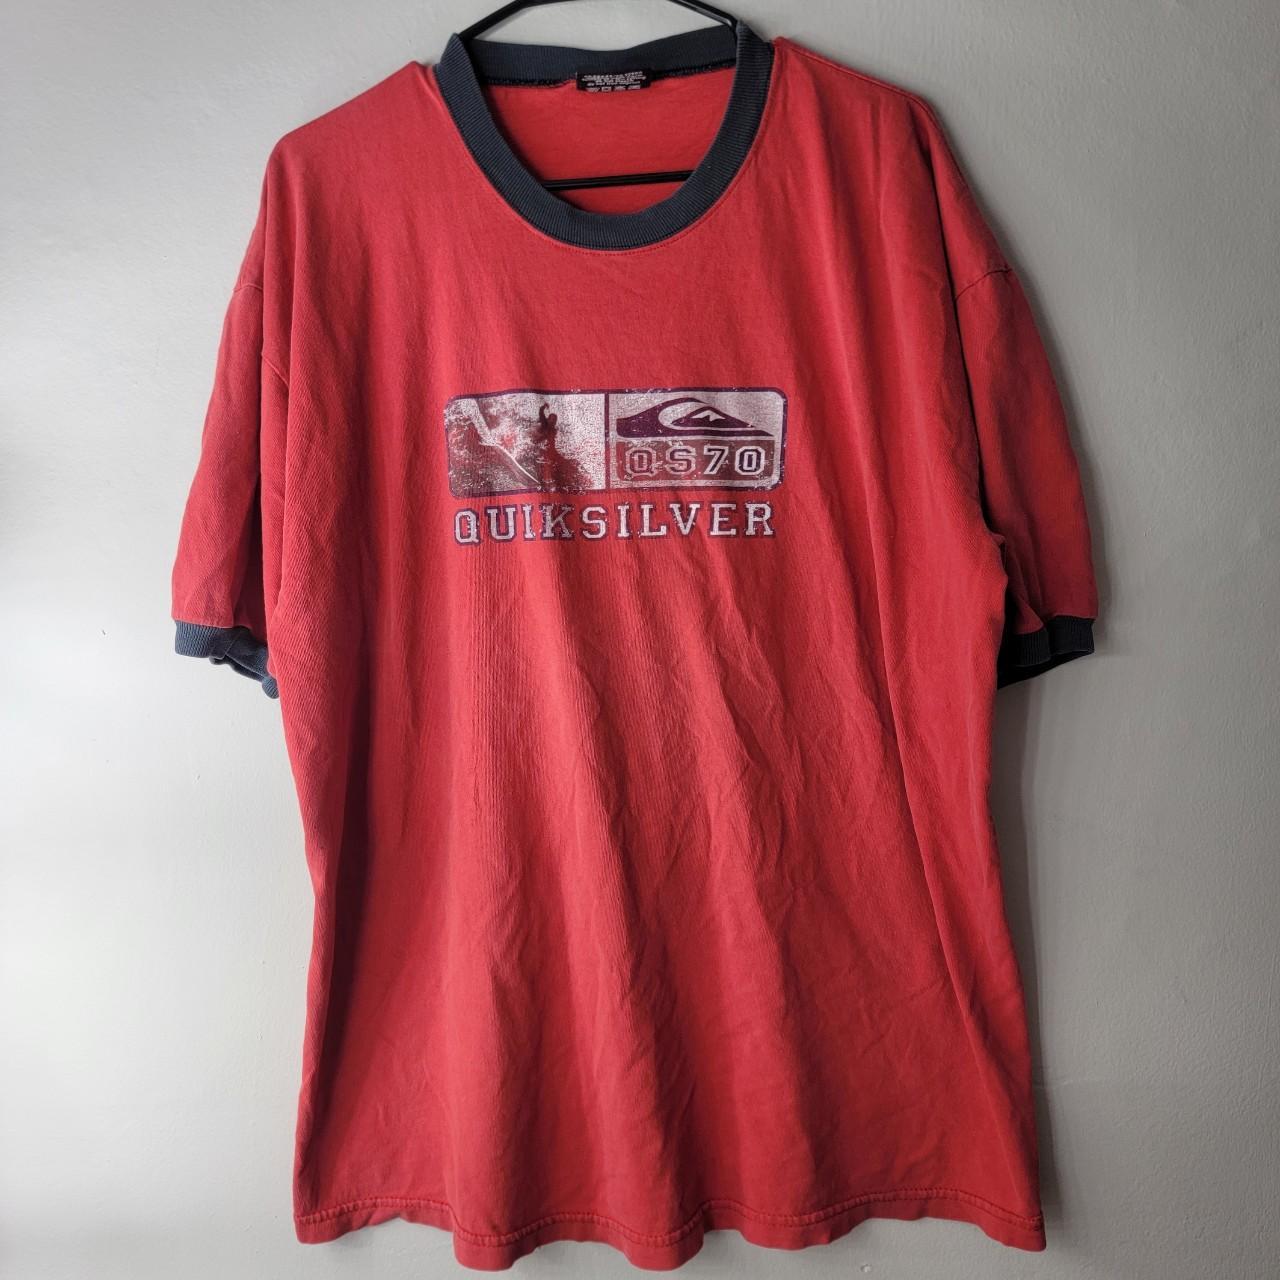 Quiksilver Men's Red and Navy T-shirt